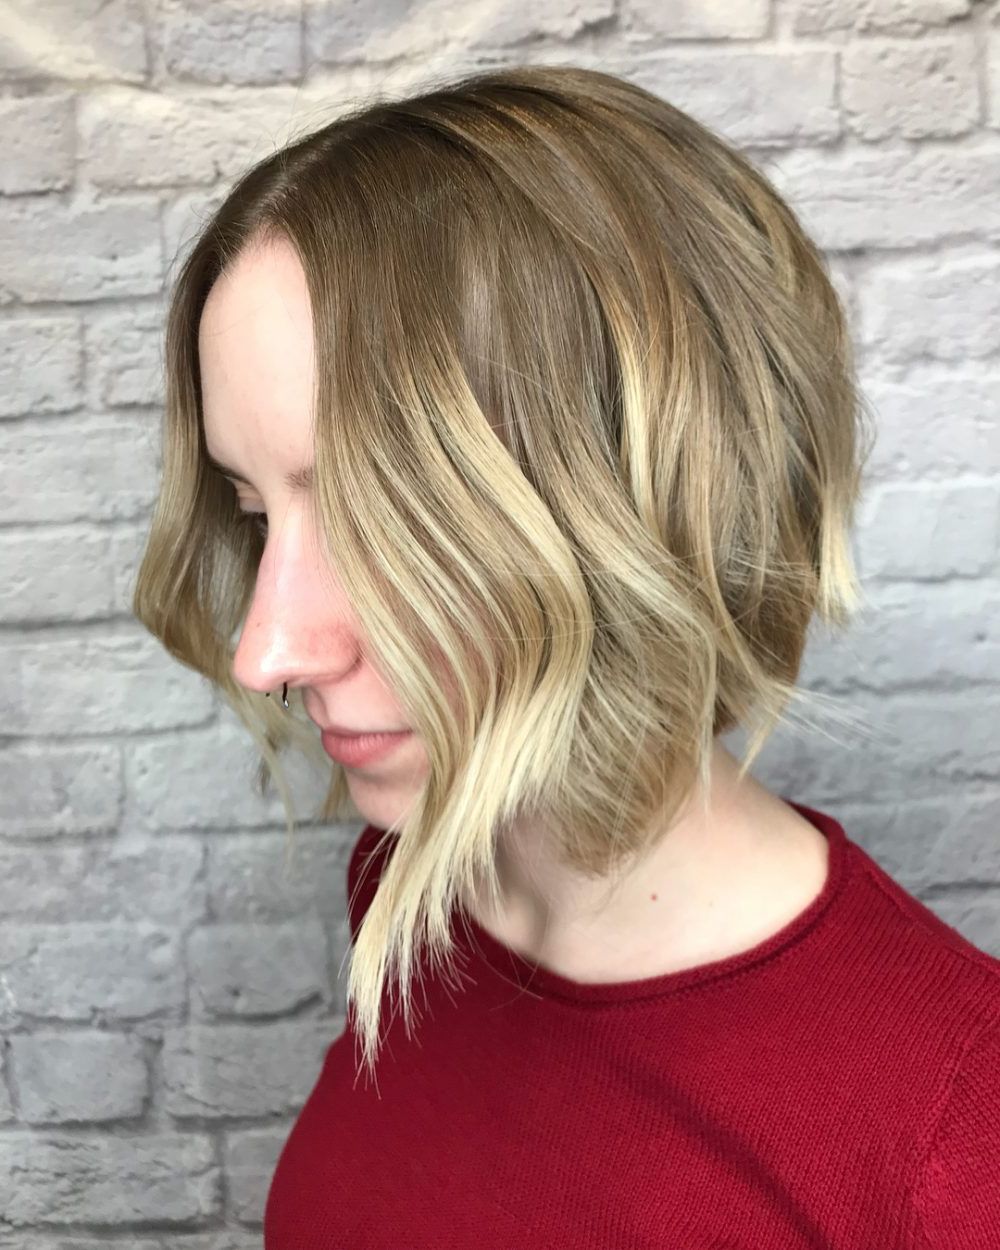 24 Flattering Middle Part Hairstyles In 2018 With Regard To Sleek Blonde Bob Haircuts With Backcombed Crown (View 16 of 20)